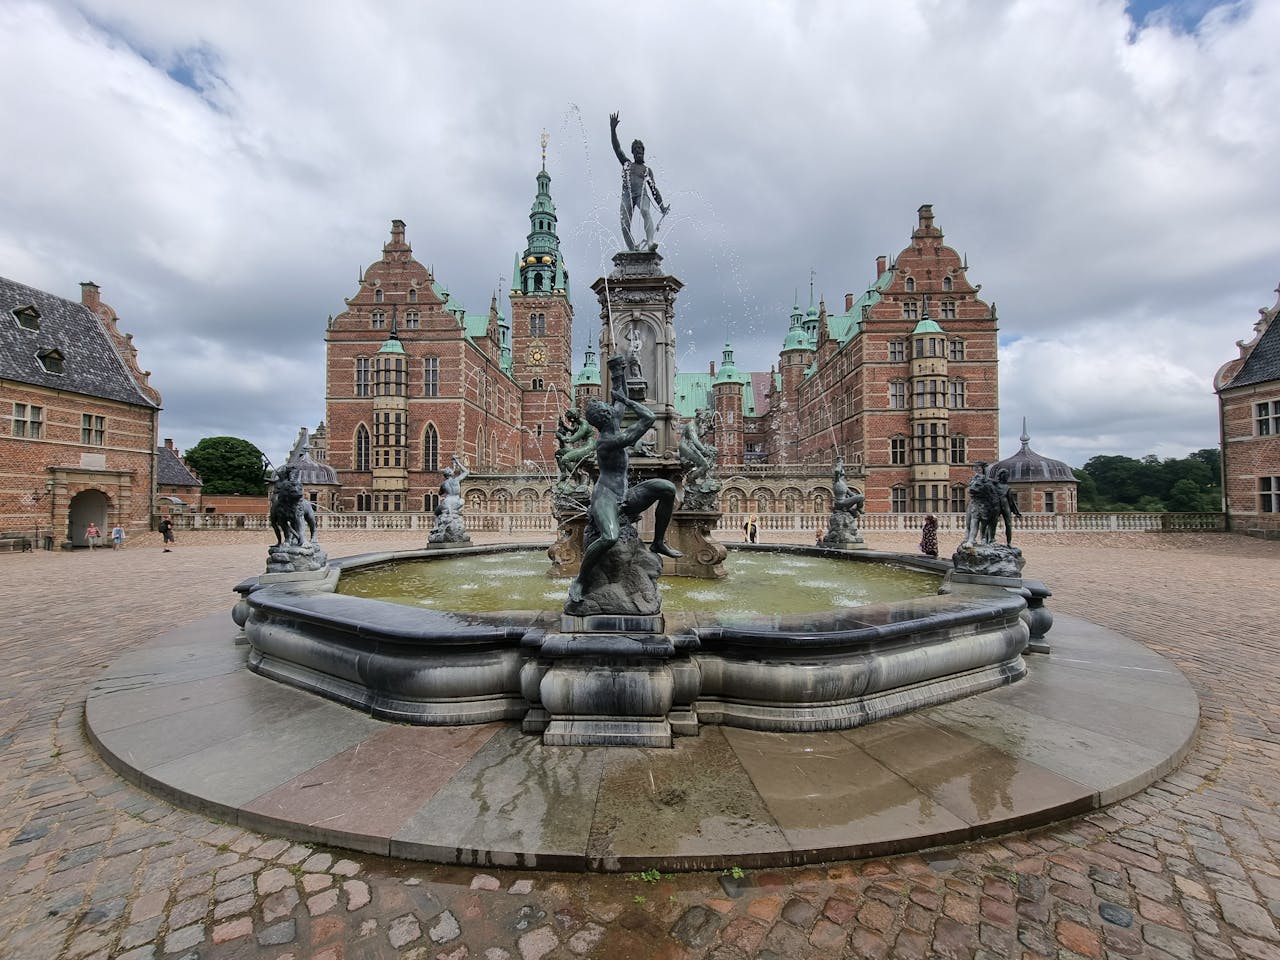 Private Tour of Castles of Roskilde, Frederiksborg, and Kronborg